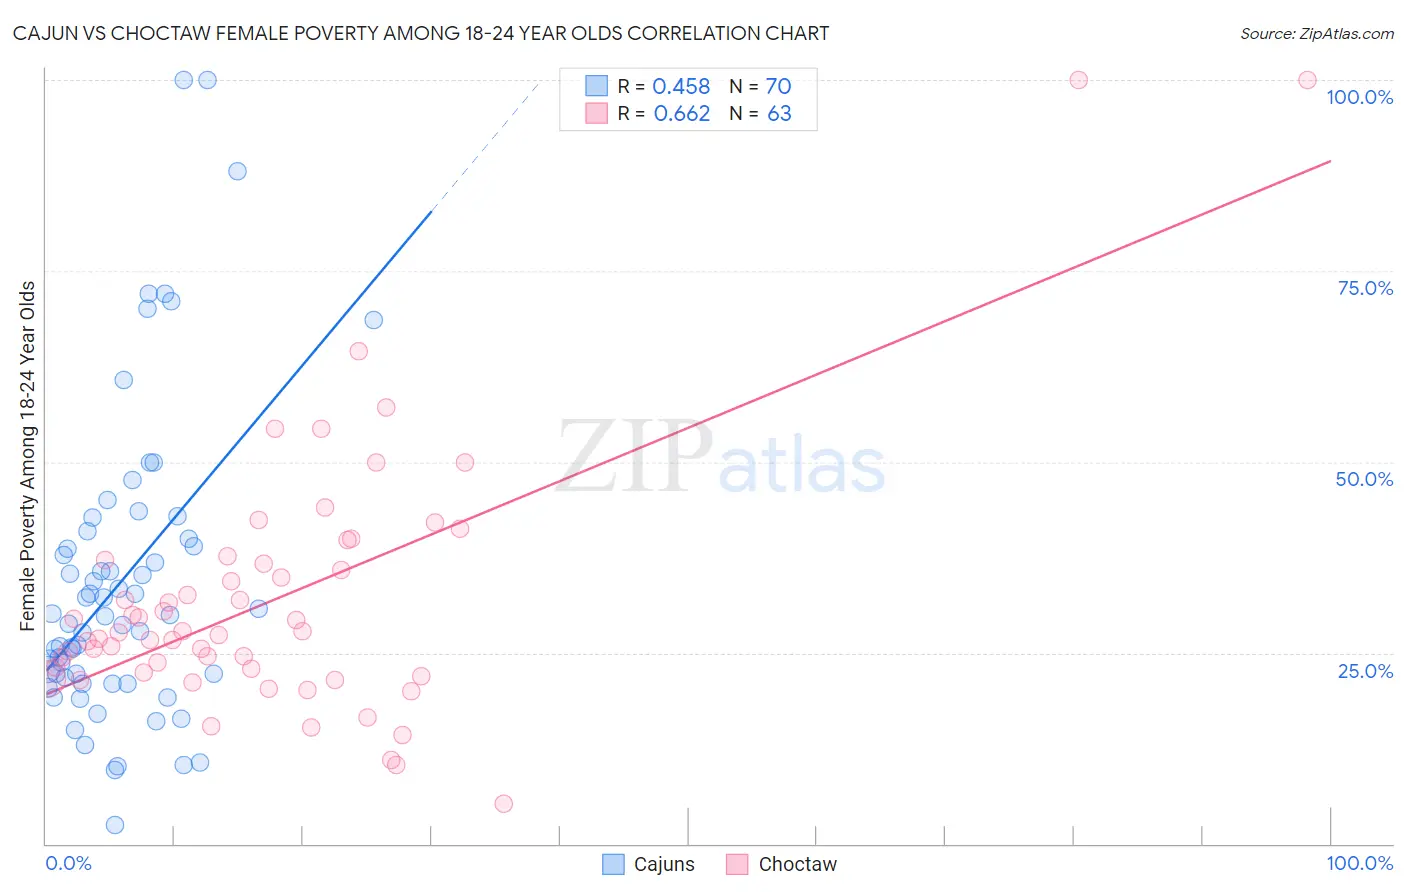 Cajun vs Choctaw Female Poverty Among 18-24 Year Olds